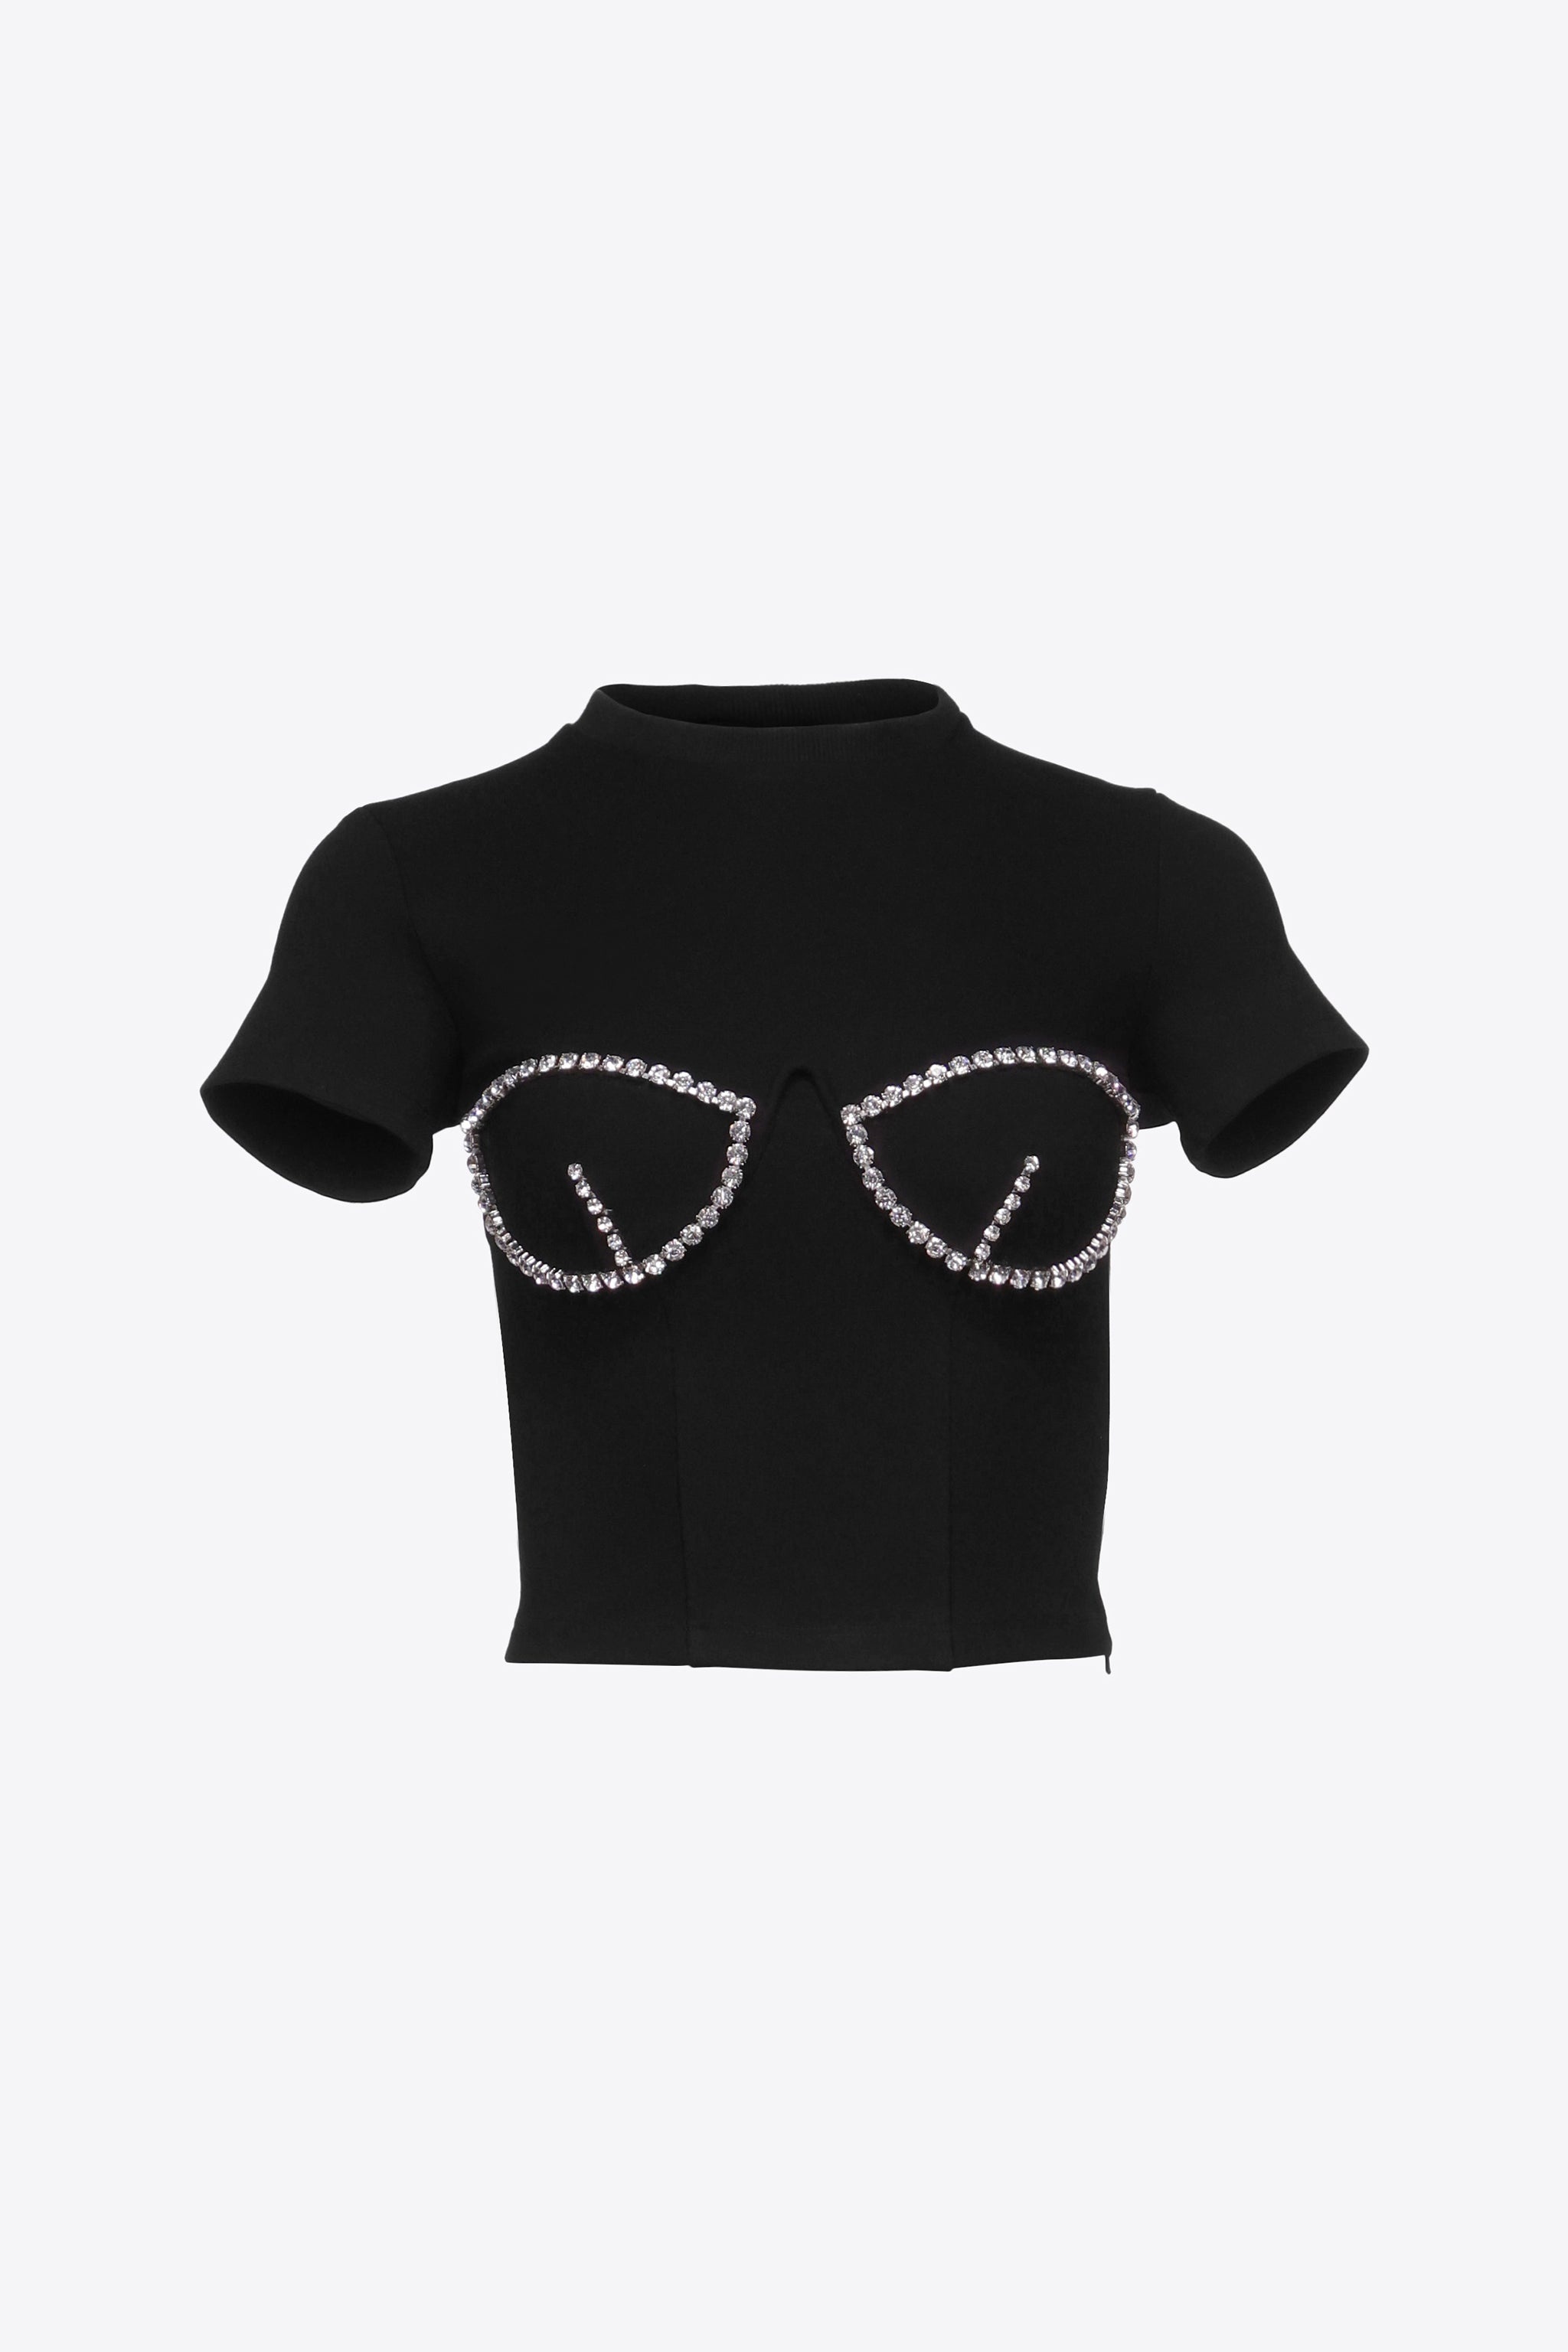 CRYSTAL BUSTIER CUP T-SHIRT - 1